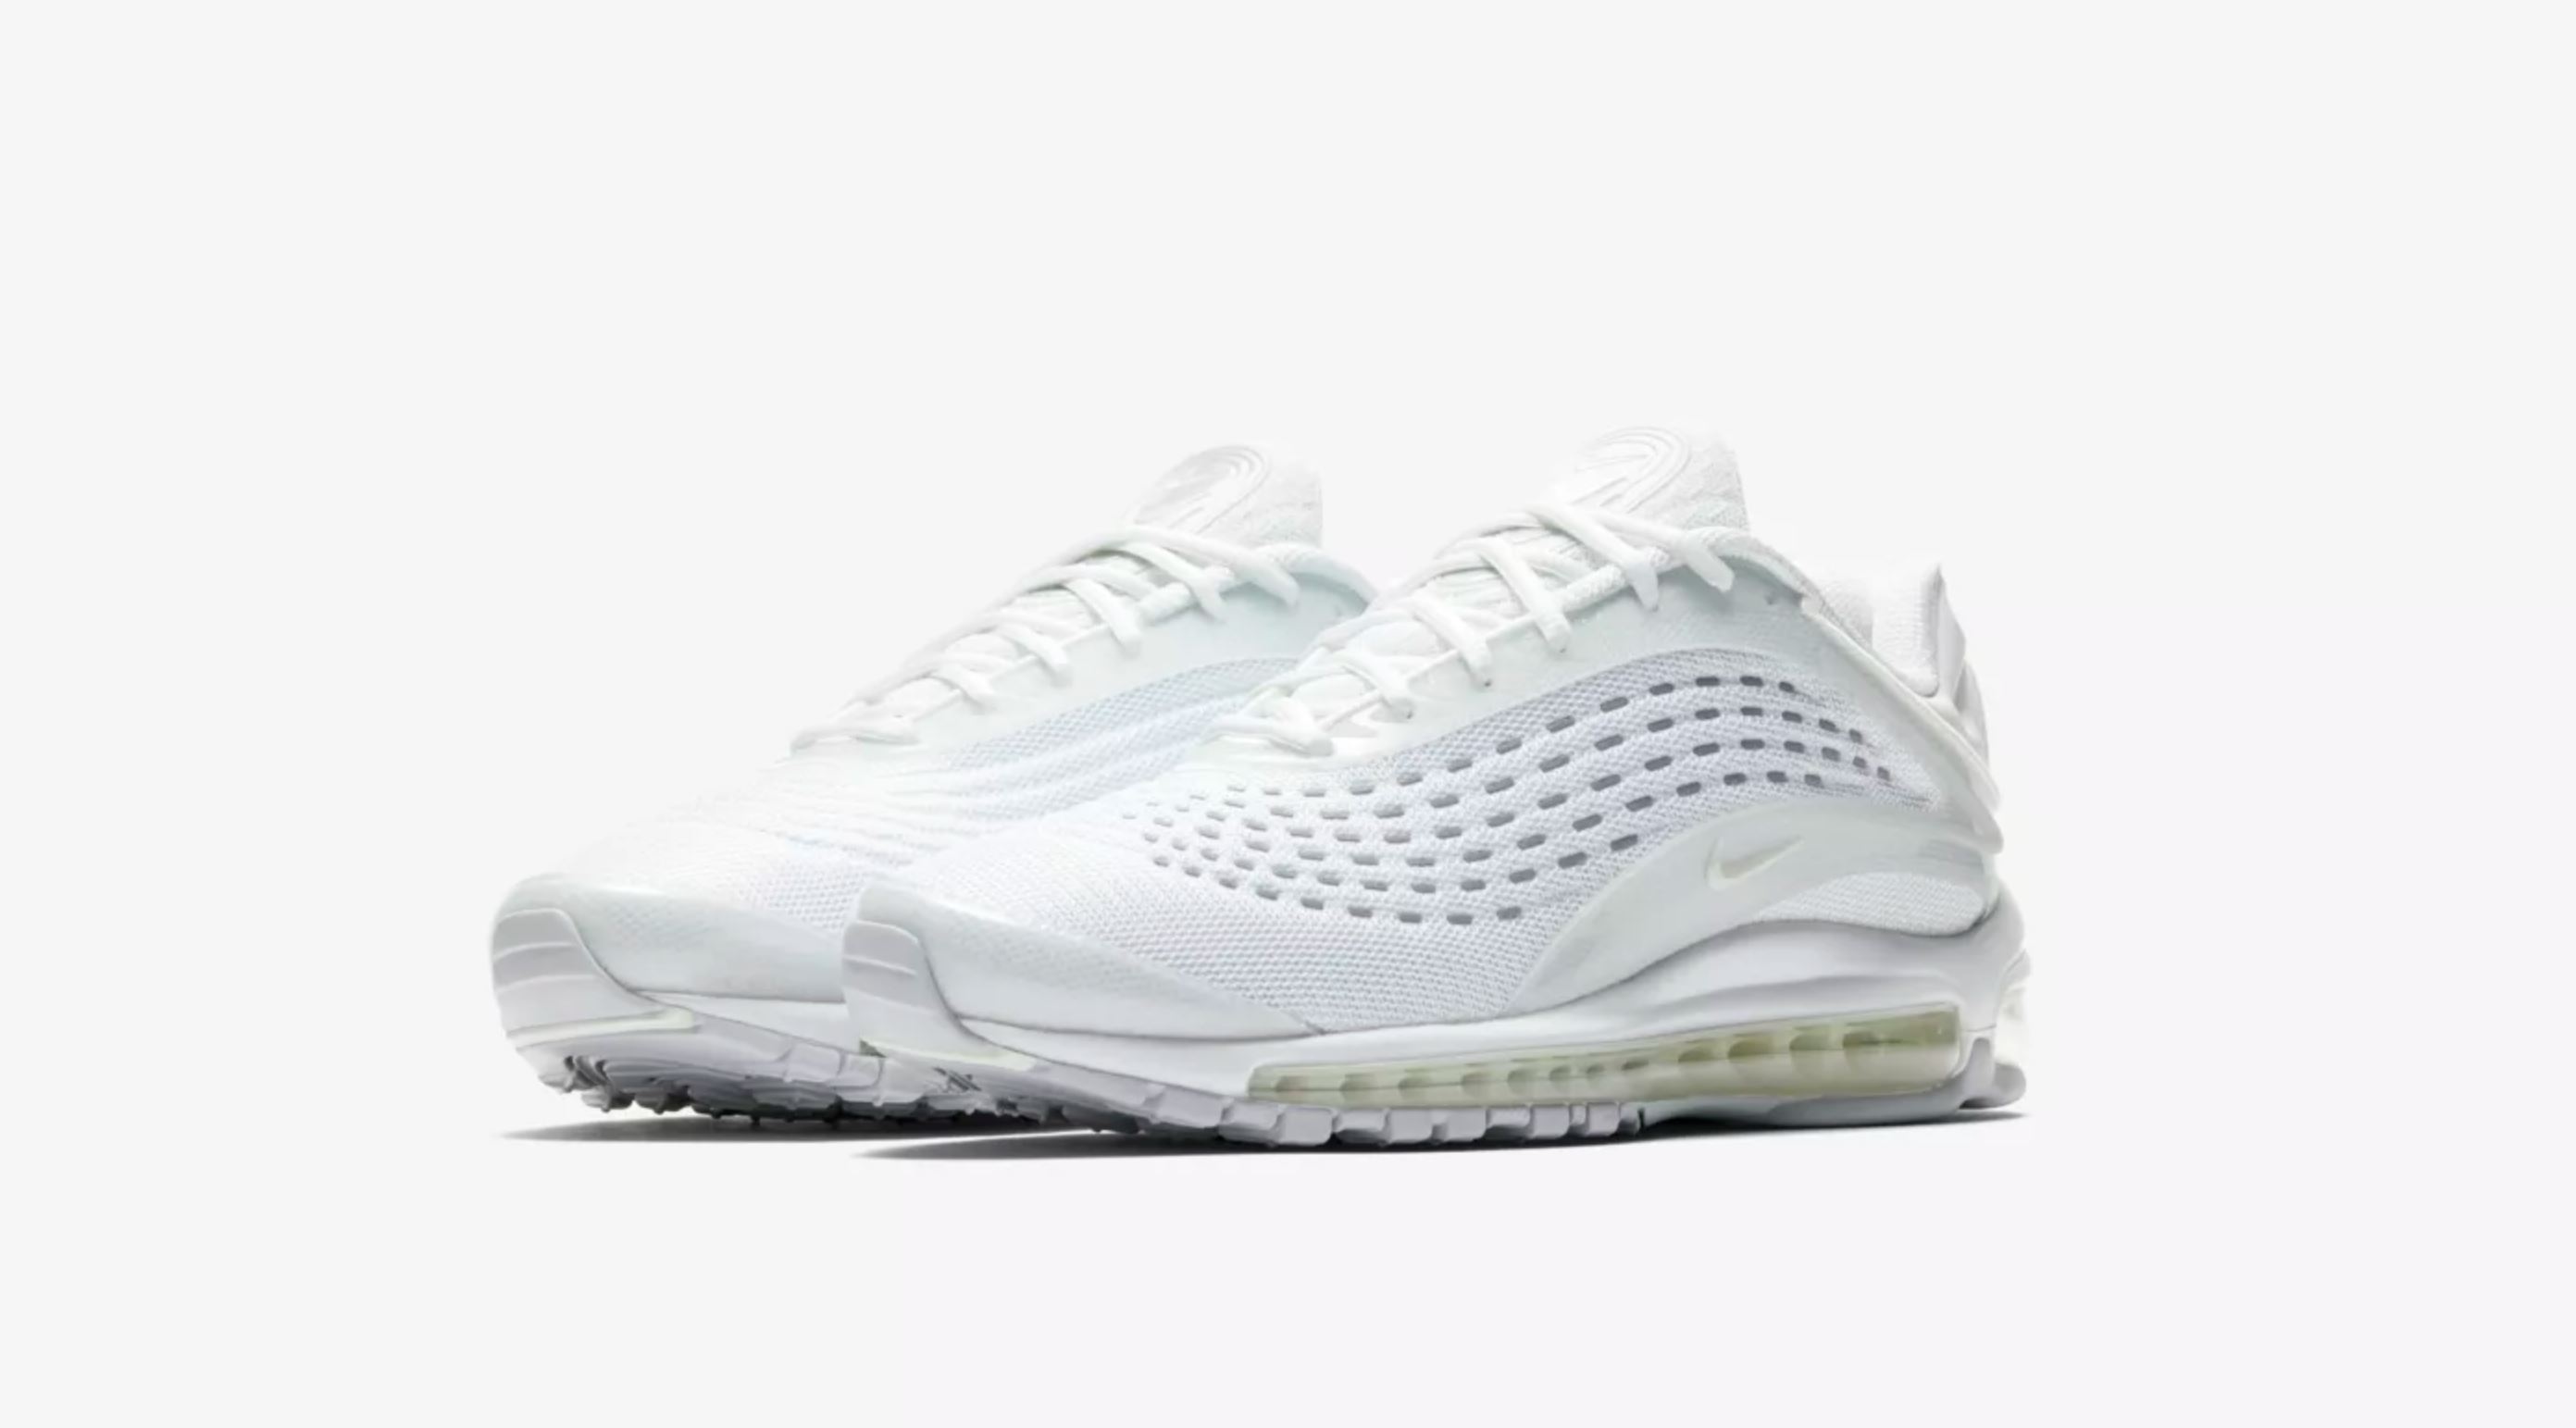 Nike Updates the Air Max Deluxe with 